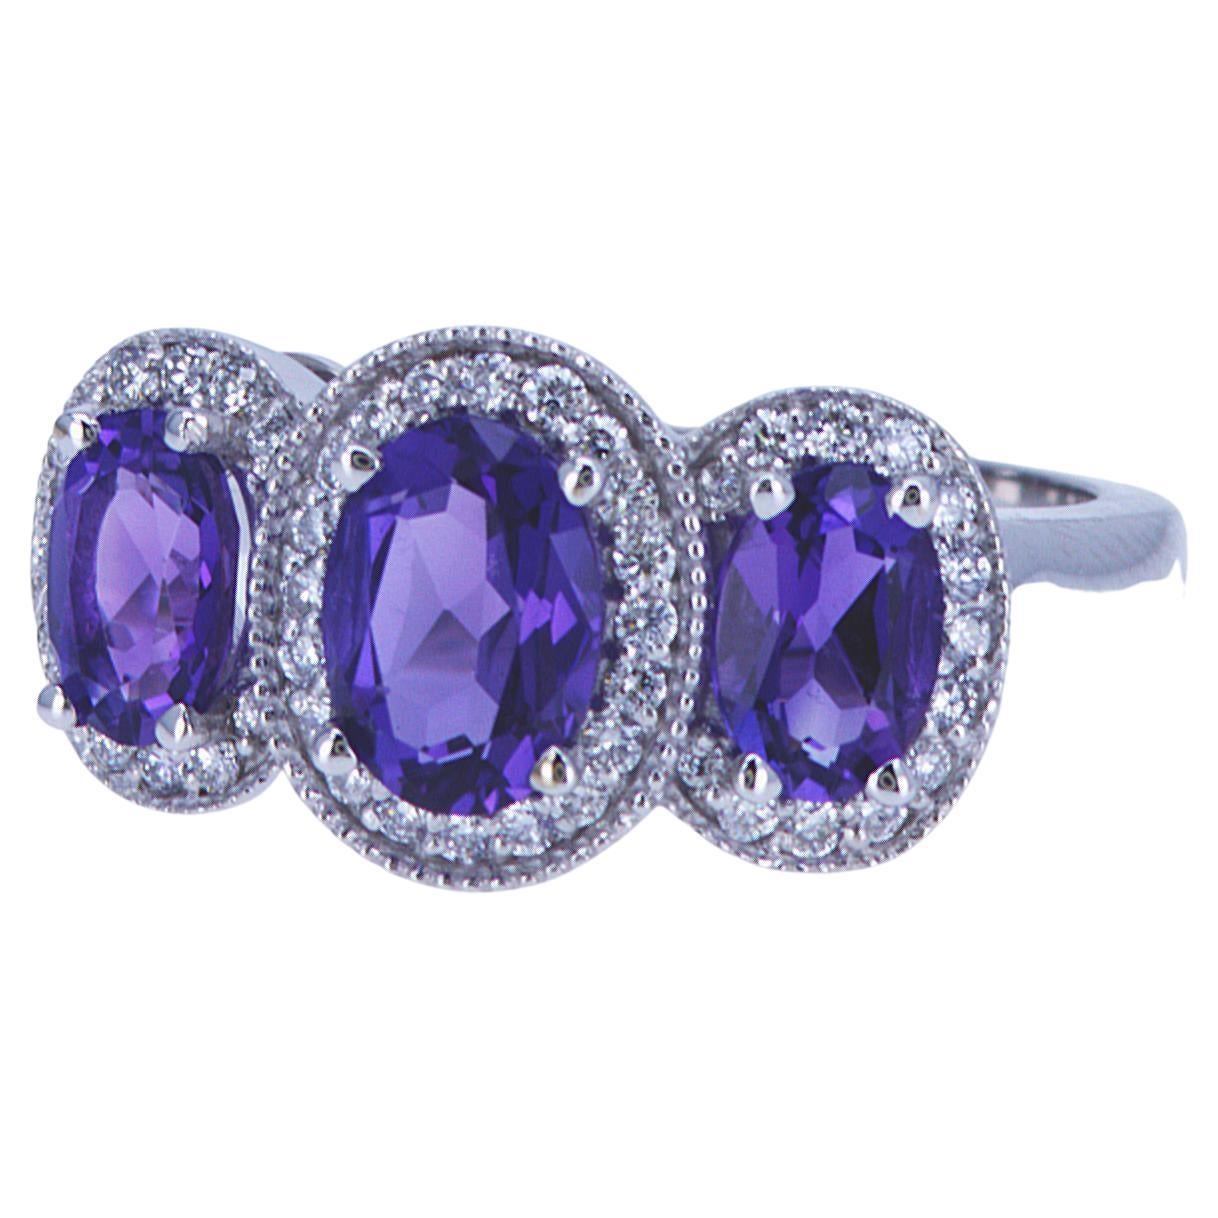 Oval Amethyst and Diamond 3-Stone Ring